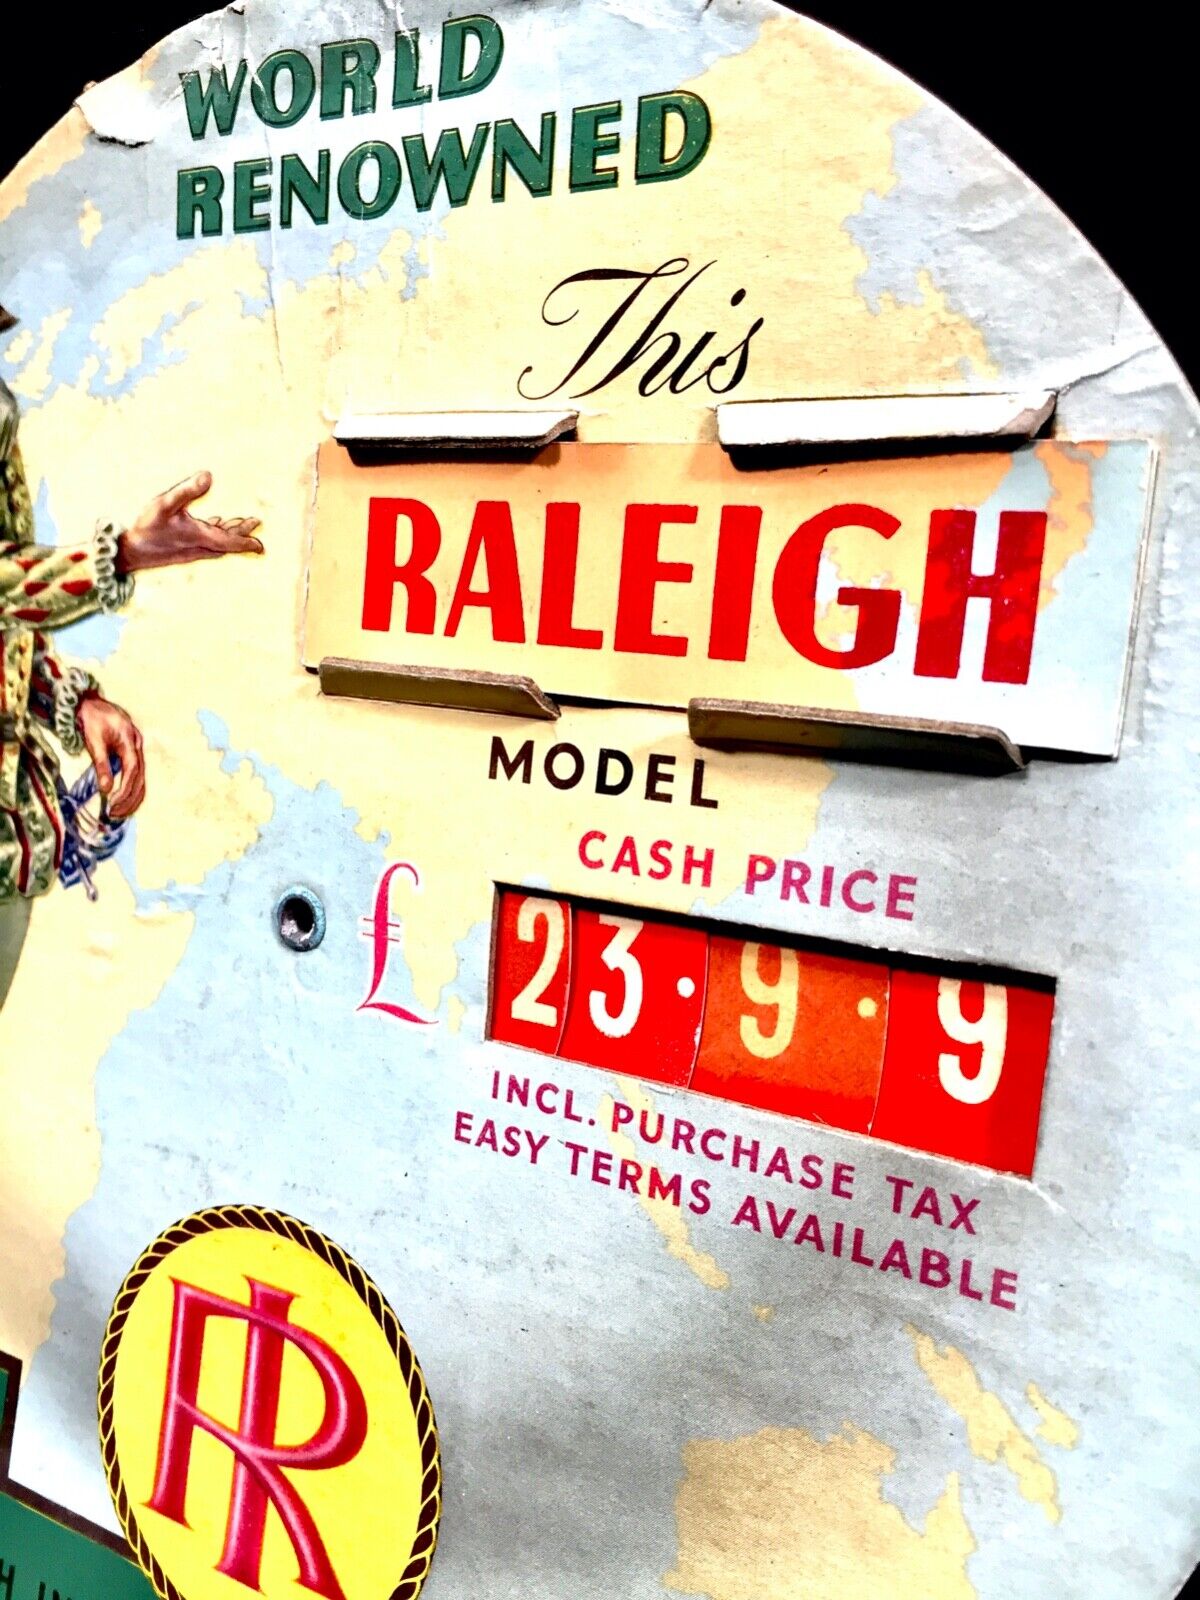 Vintage Raleigh Pictorial Bicycle Advertising Sign Showcard Shop Counter Display